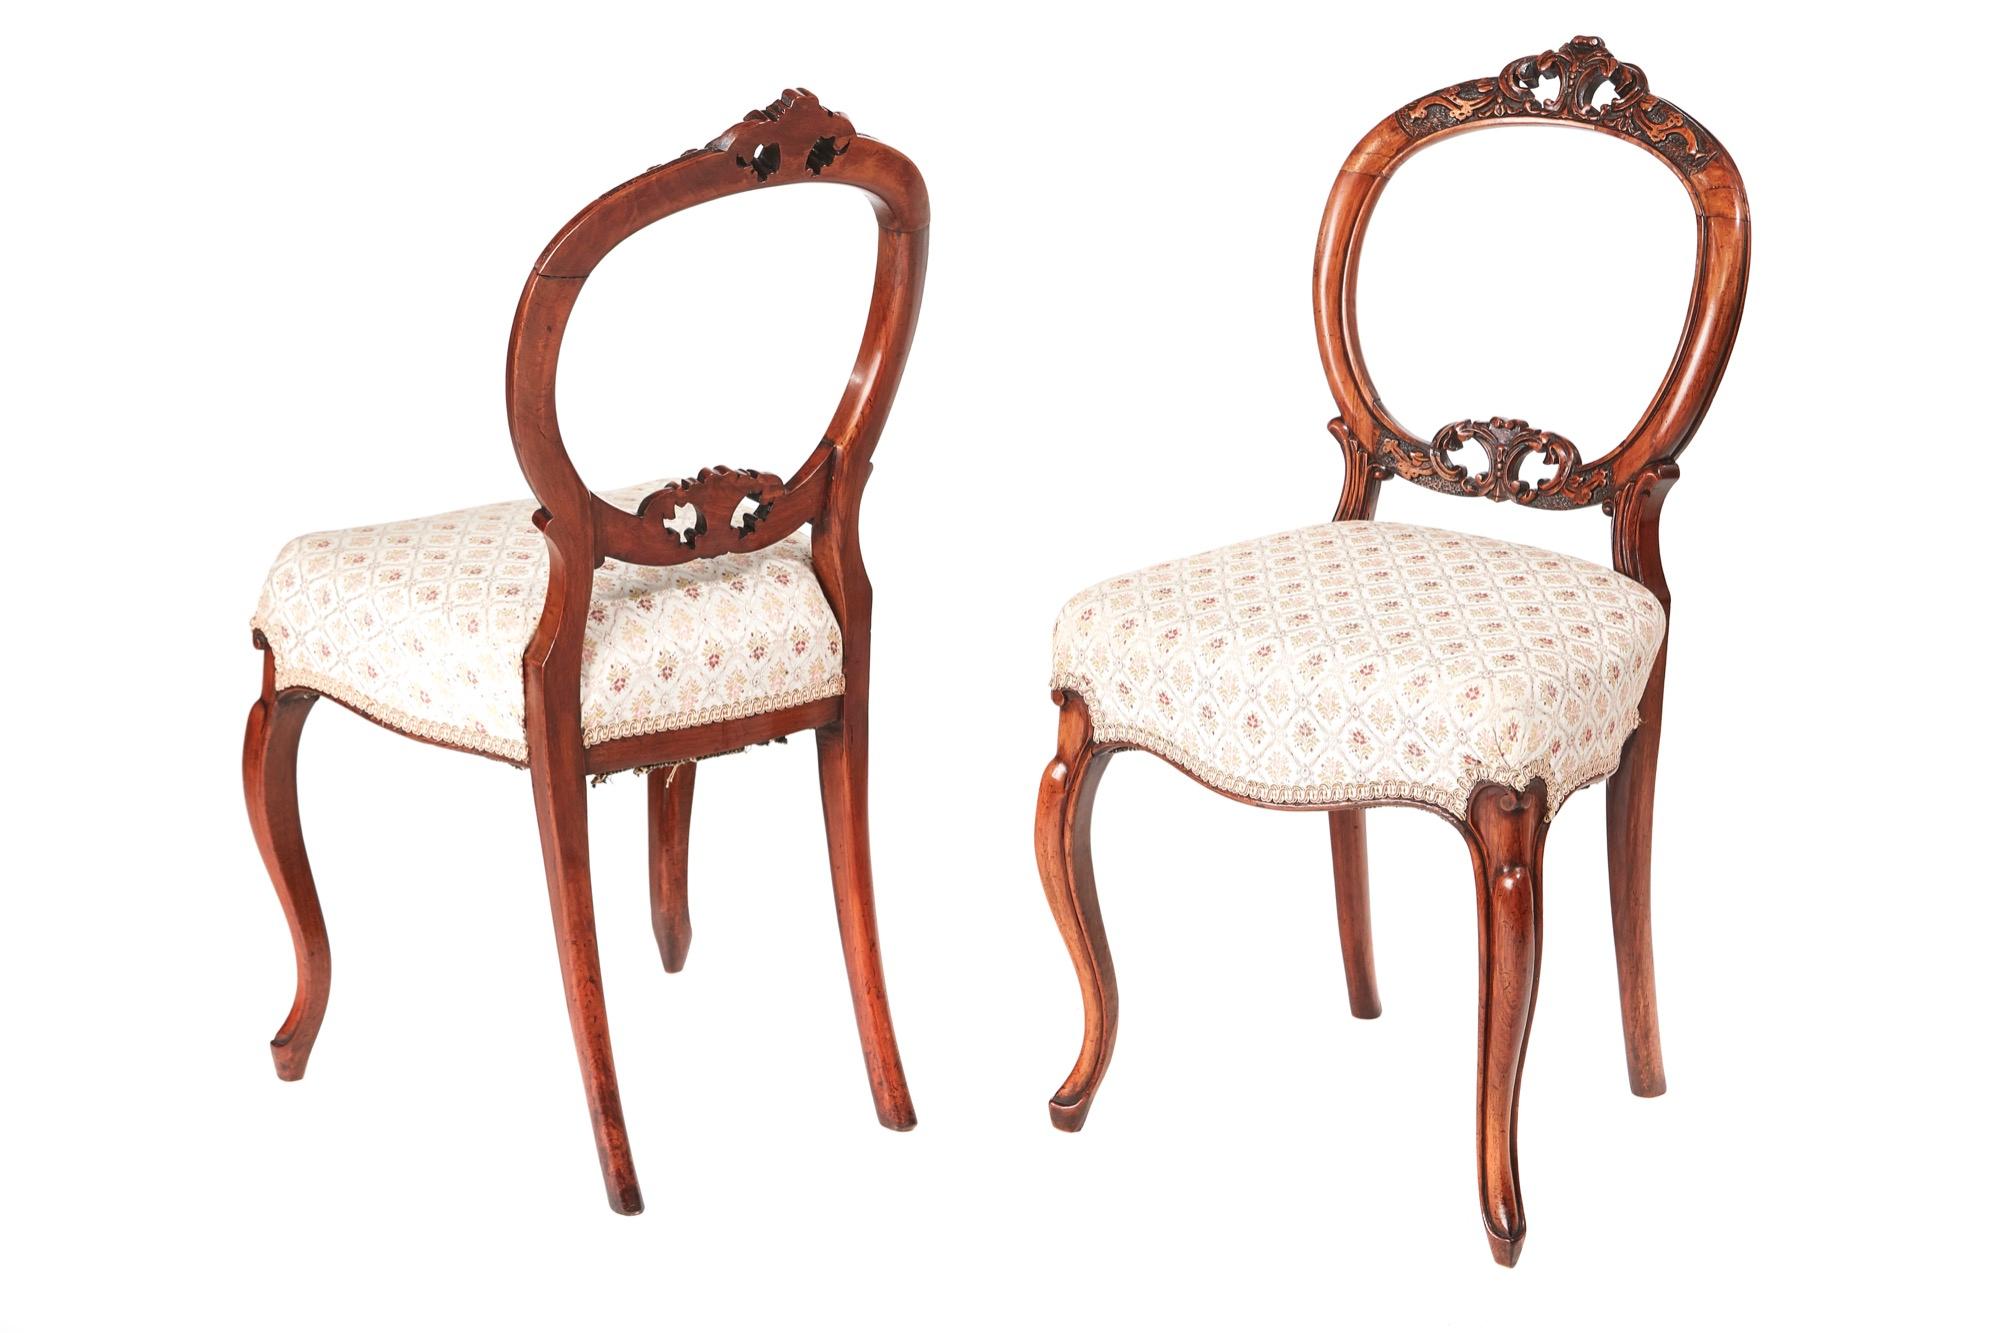 Quality pair of Victorian carved walnut side chairs, with a lovely carved shaped top, carved centre splat, newly re-upholstered seats, serpentine front rail, standing on shaped cabriole legs to the front outswept back legs
Lovely color and